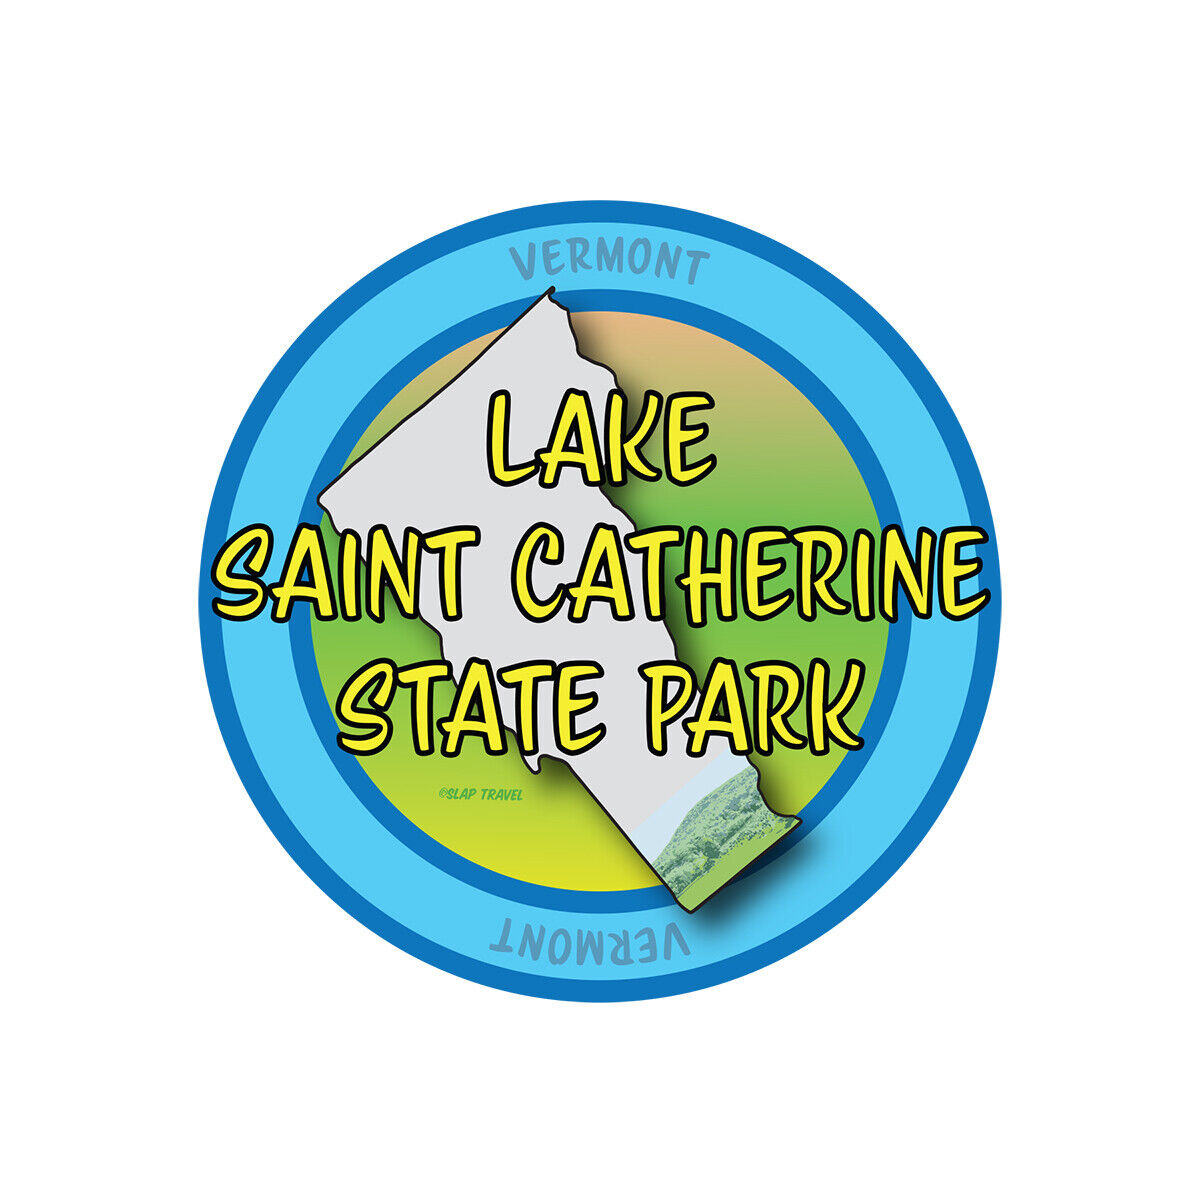 Lake Saint Super popular Cheap super special price specialty store Catherine State Park inch Decal Sticker 4x4 Vermont